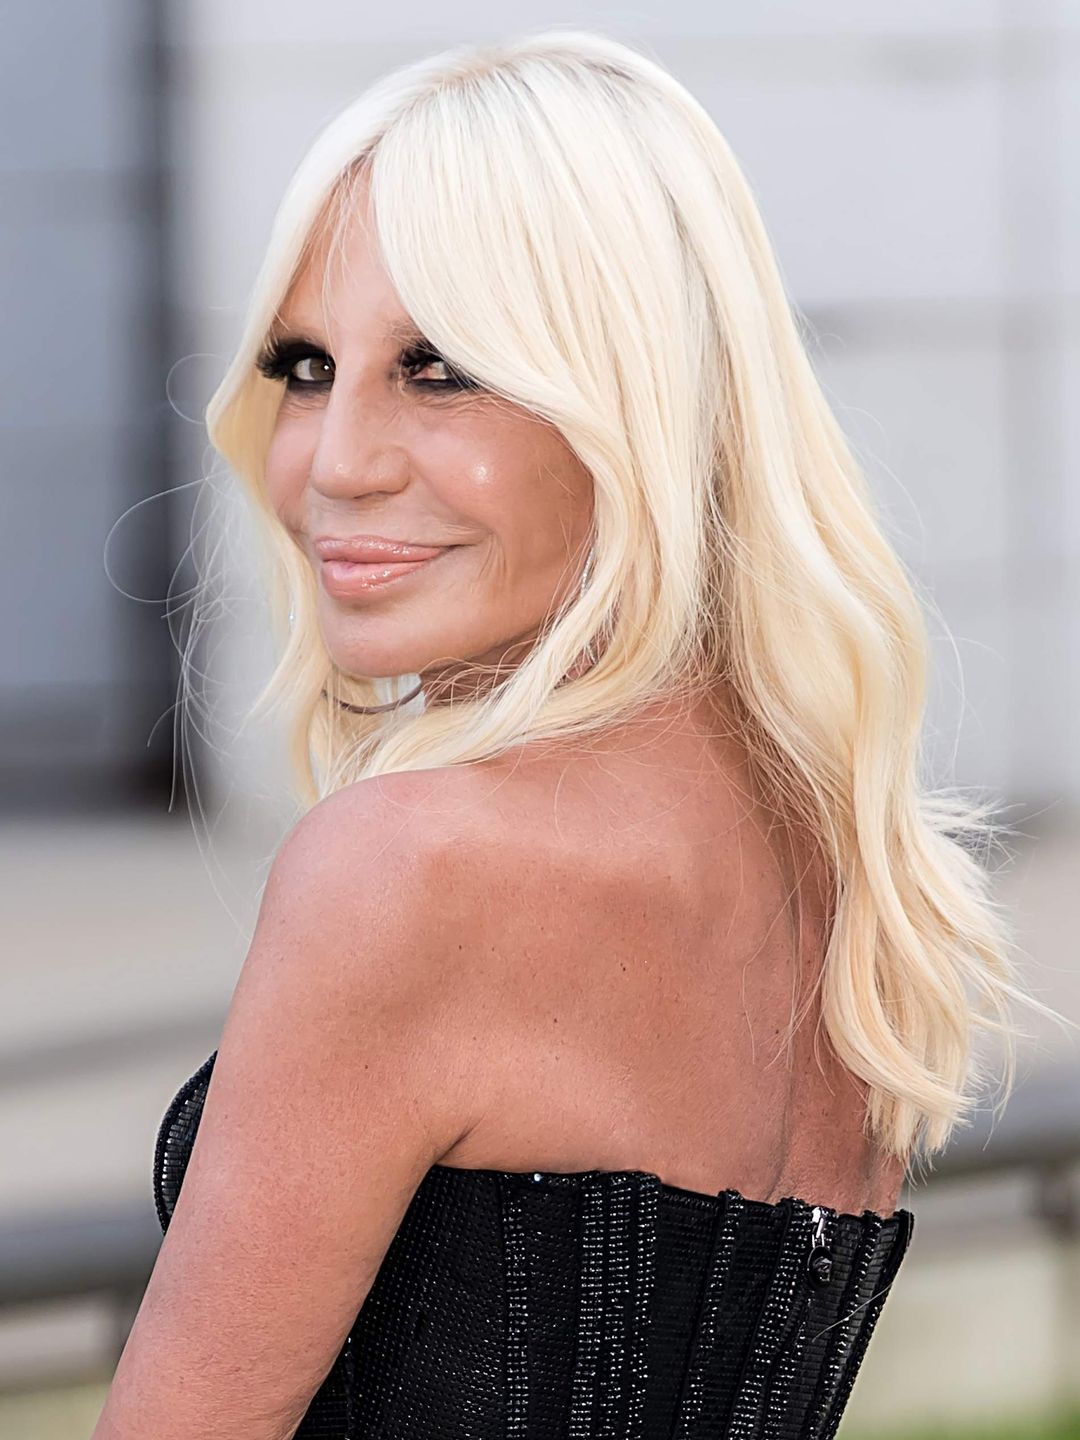 Donatella Versace how did she became famous